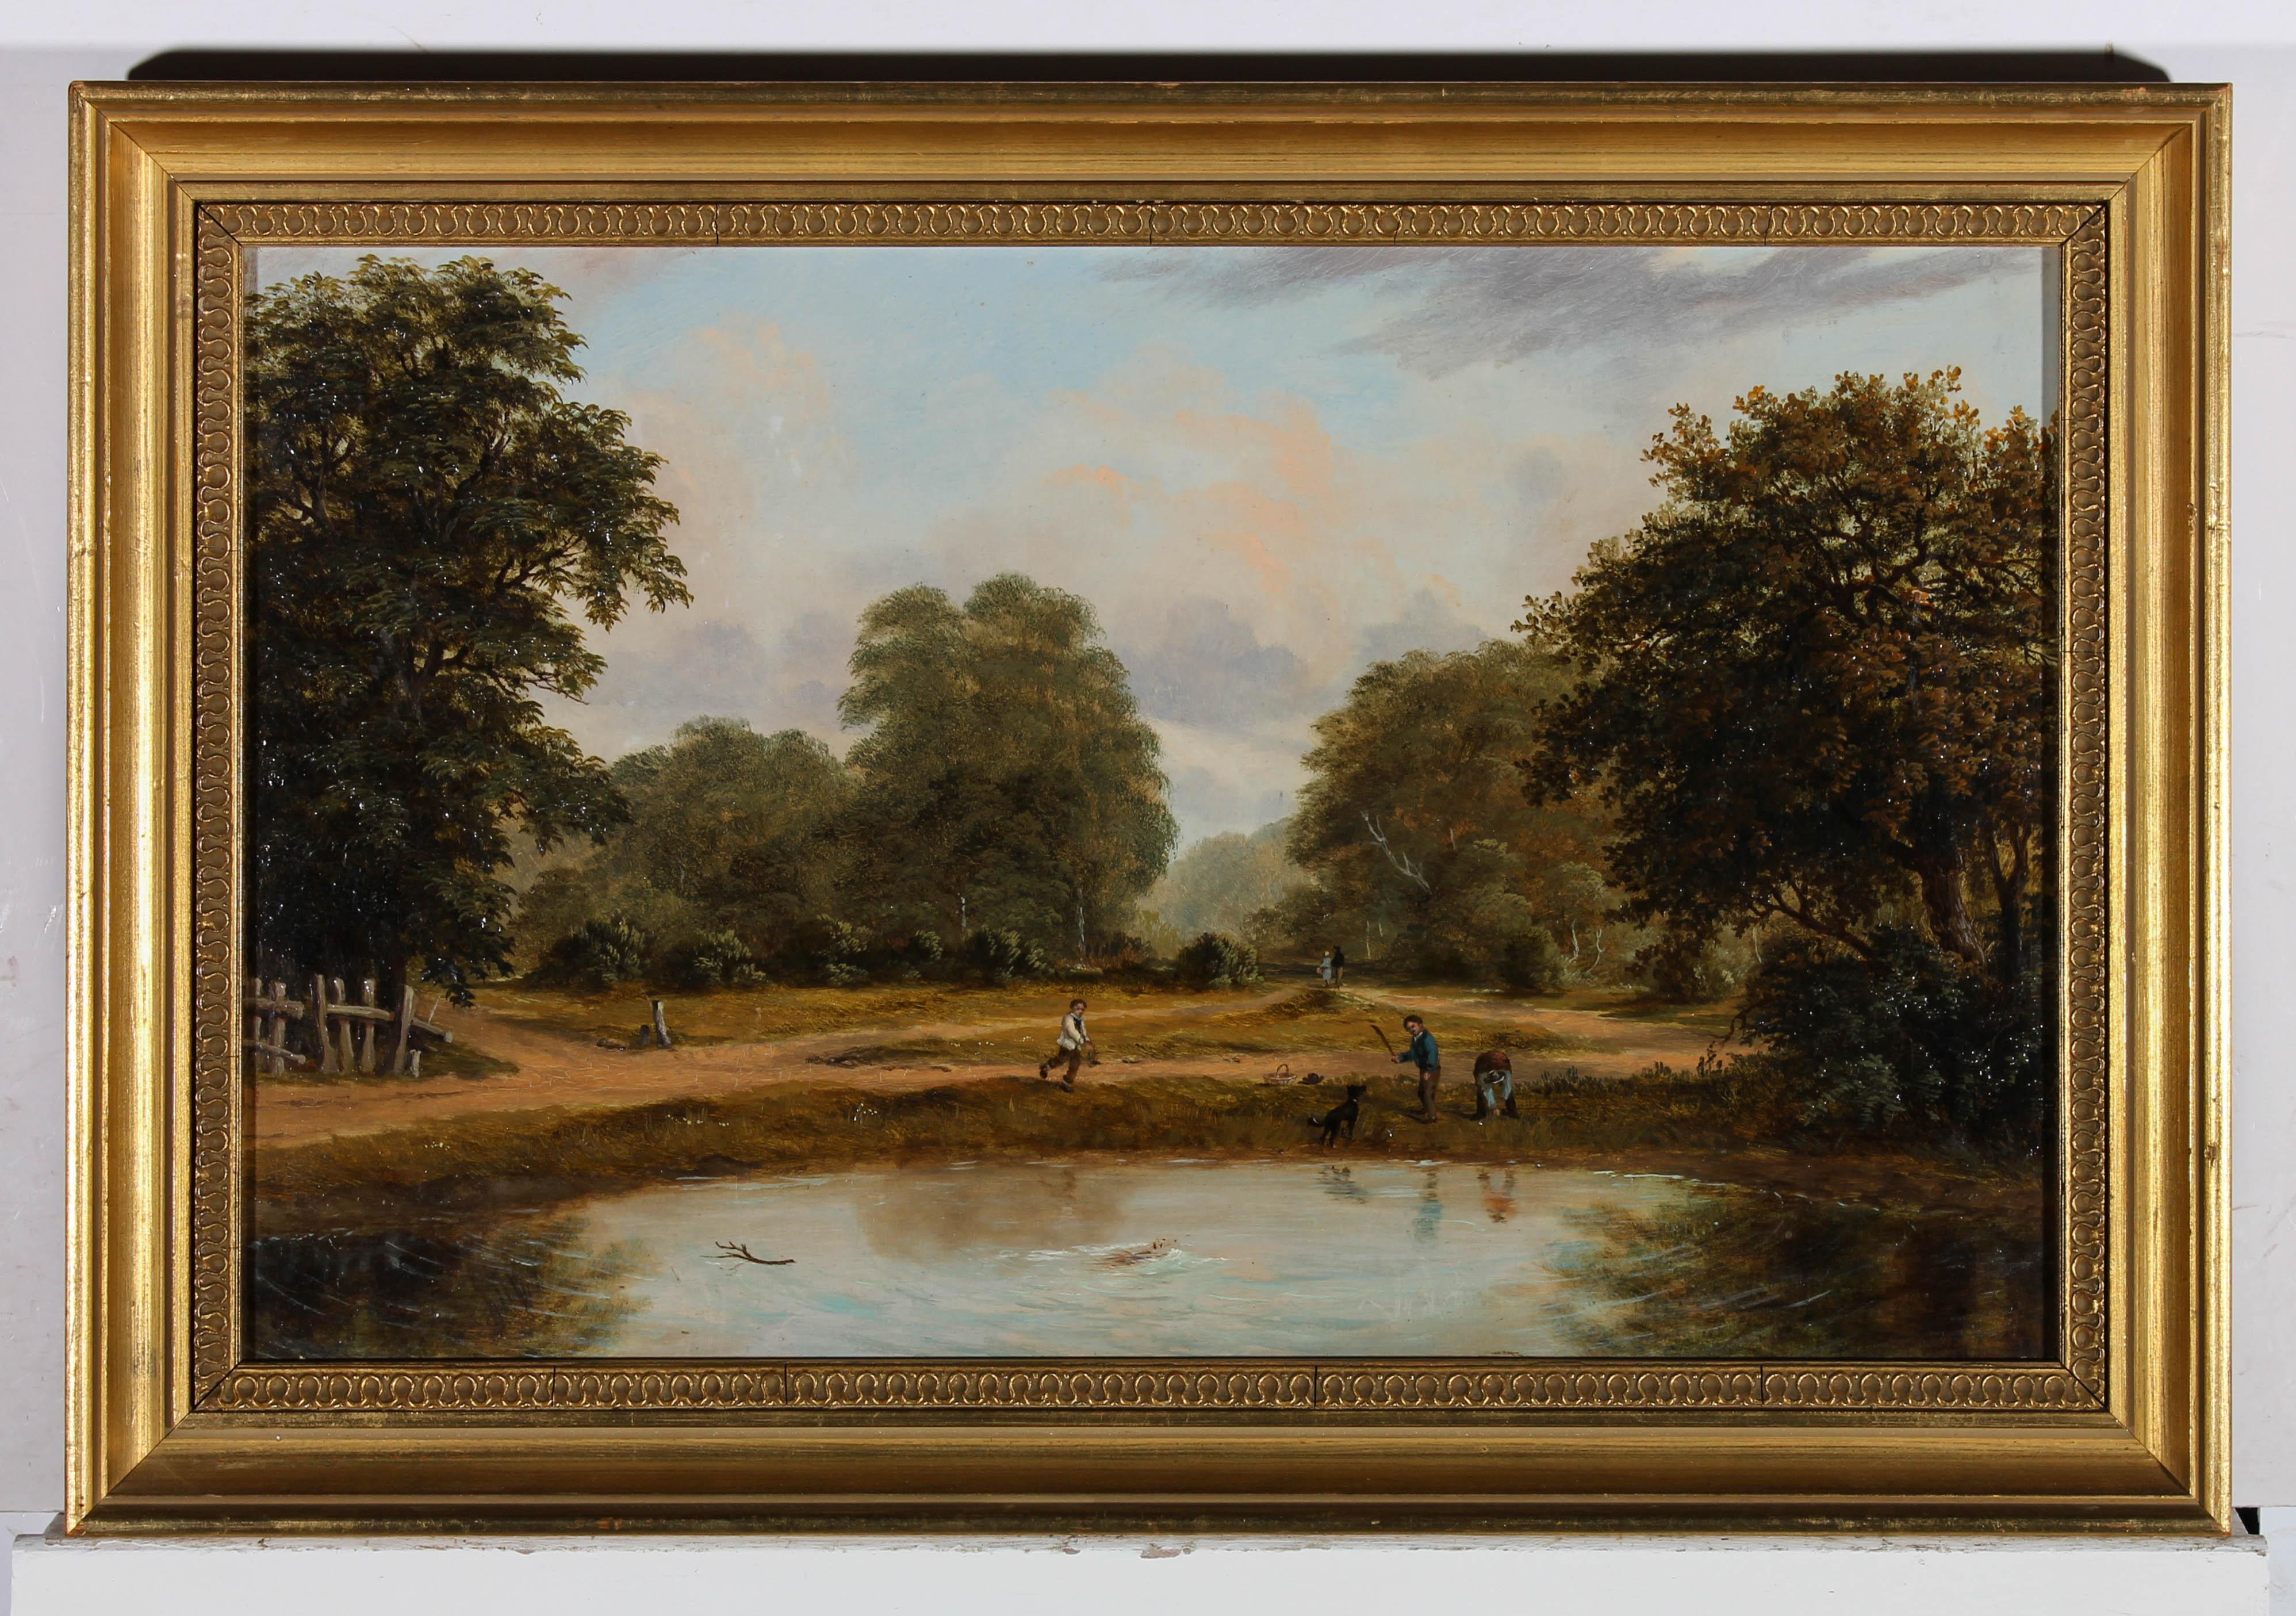 An accomplished English School oil landscape from the late 19th century period. Figures busy themselves in the foreground, with one gentleman looking concerned for his dog, who has boldly interrupted someone's quiet day by the river. The painting is